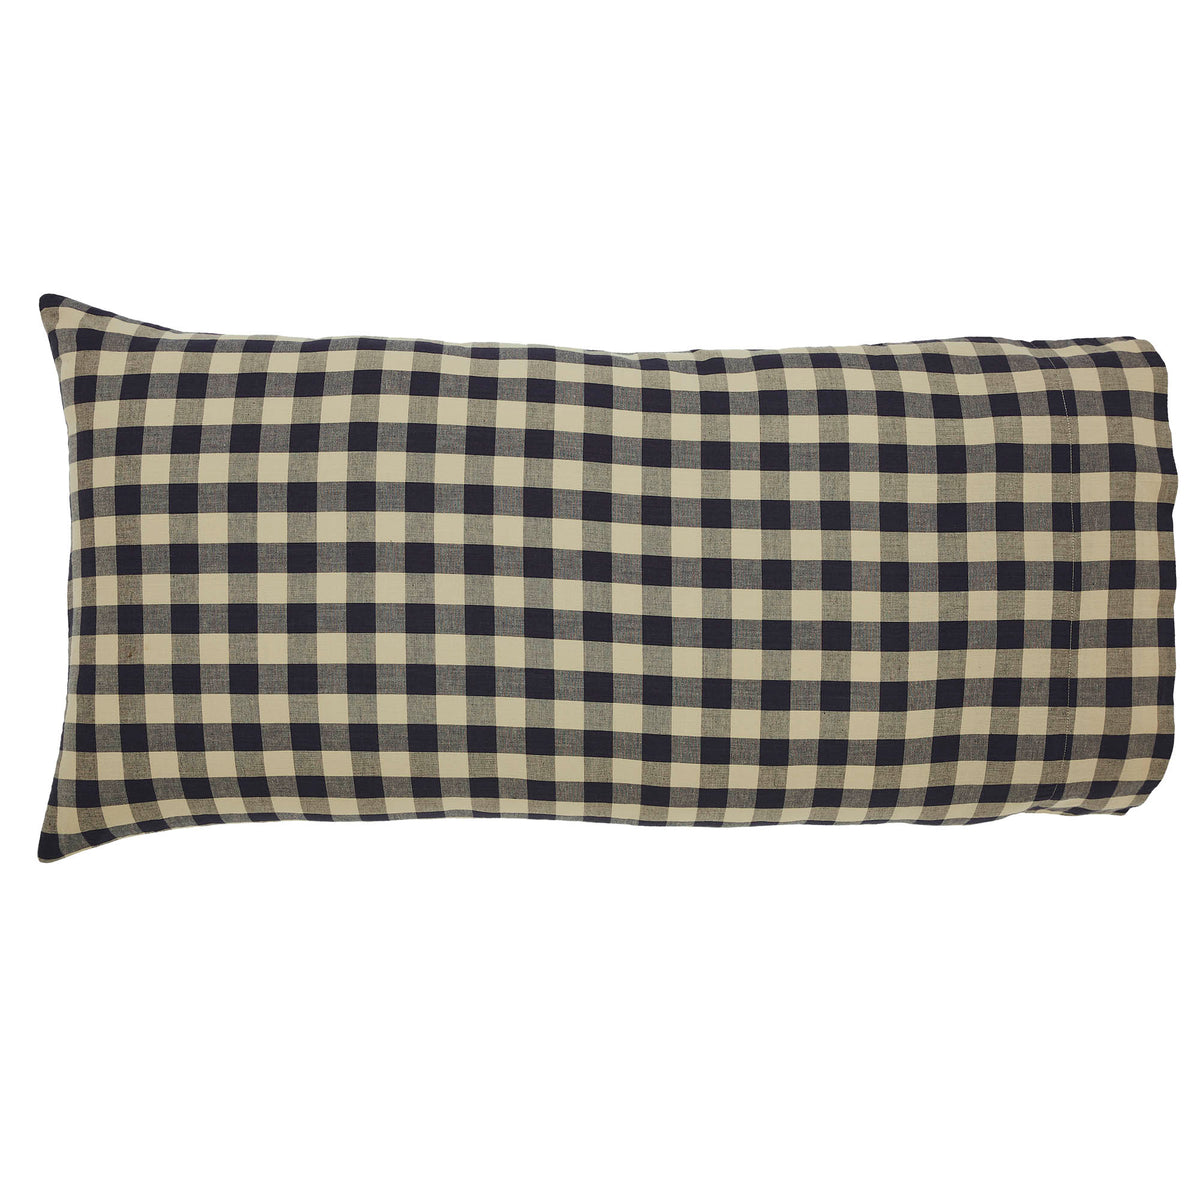 My Country King Pillow Case Set of 2 21x40